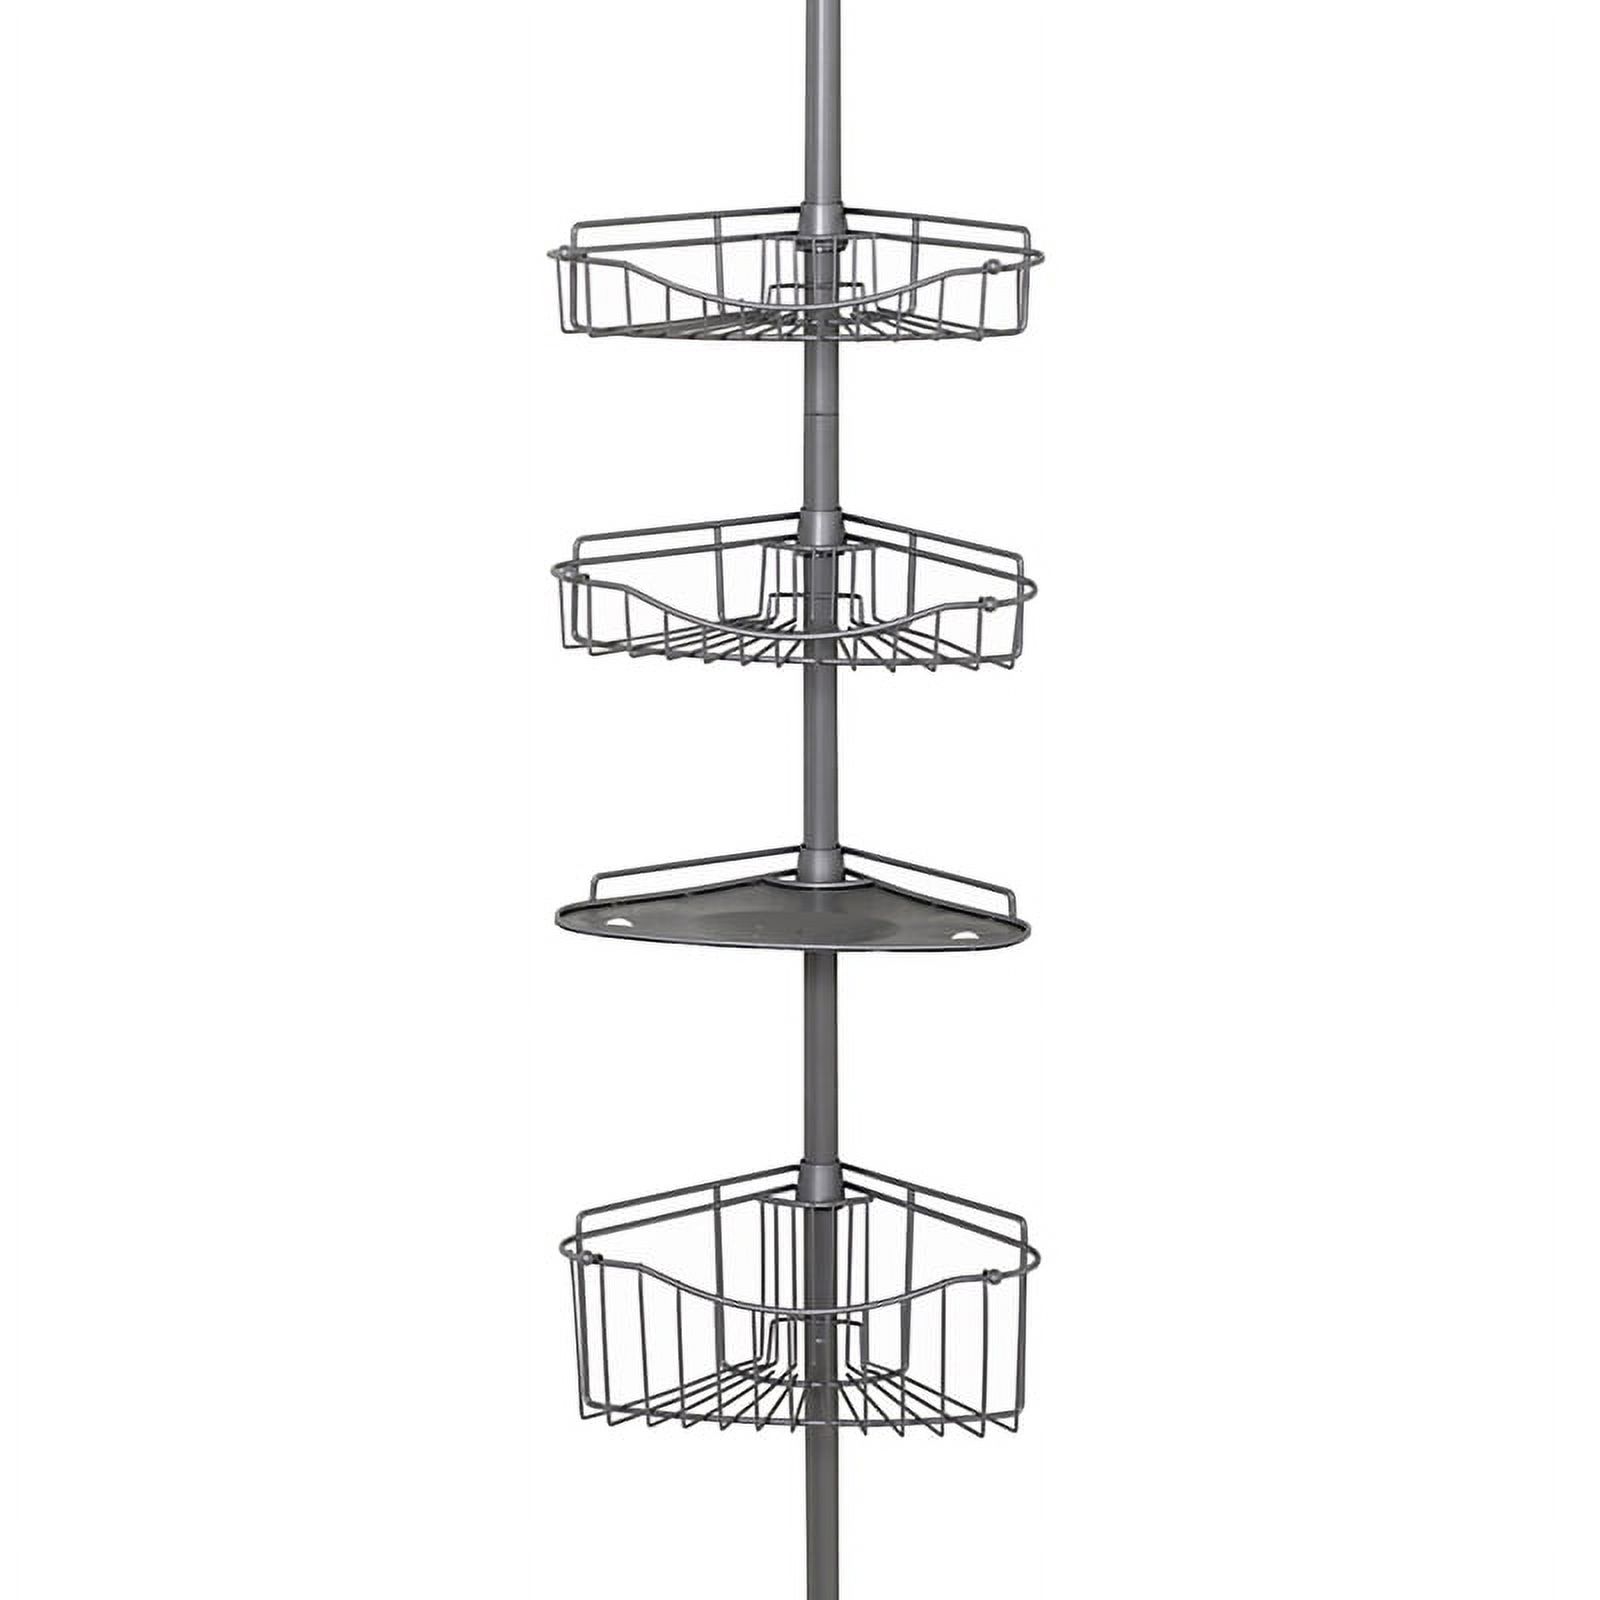 Satin Nickel Shower Caddy, Zenna Home Tension Pole - image 1 of 2